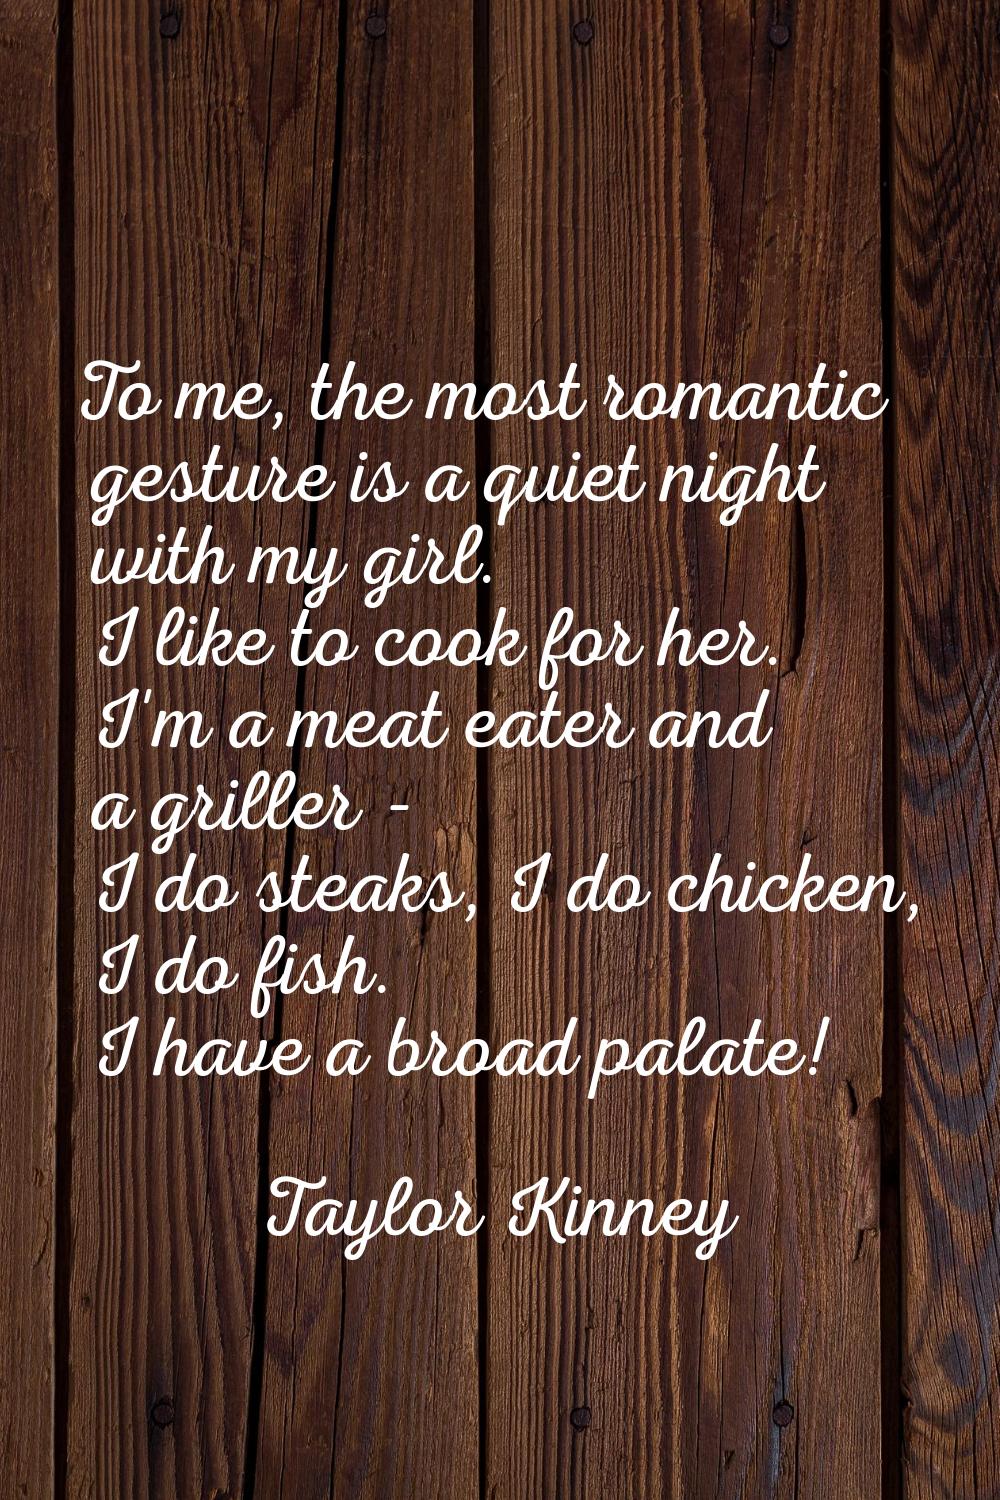 To me, the most romantic gesture is a quiet night with my girl. I like to cook for her. I'm a meat 